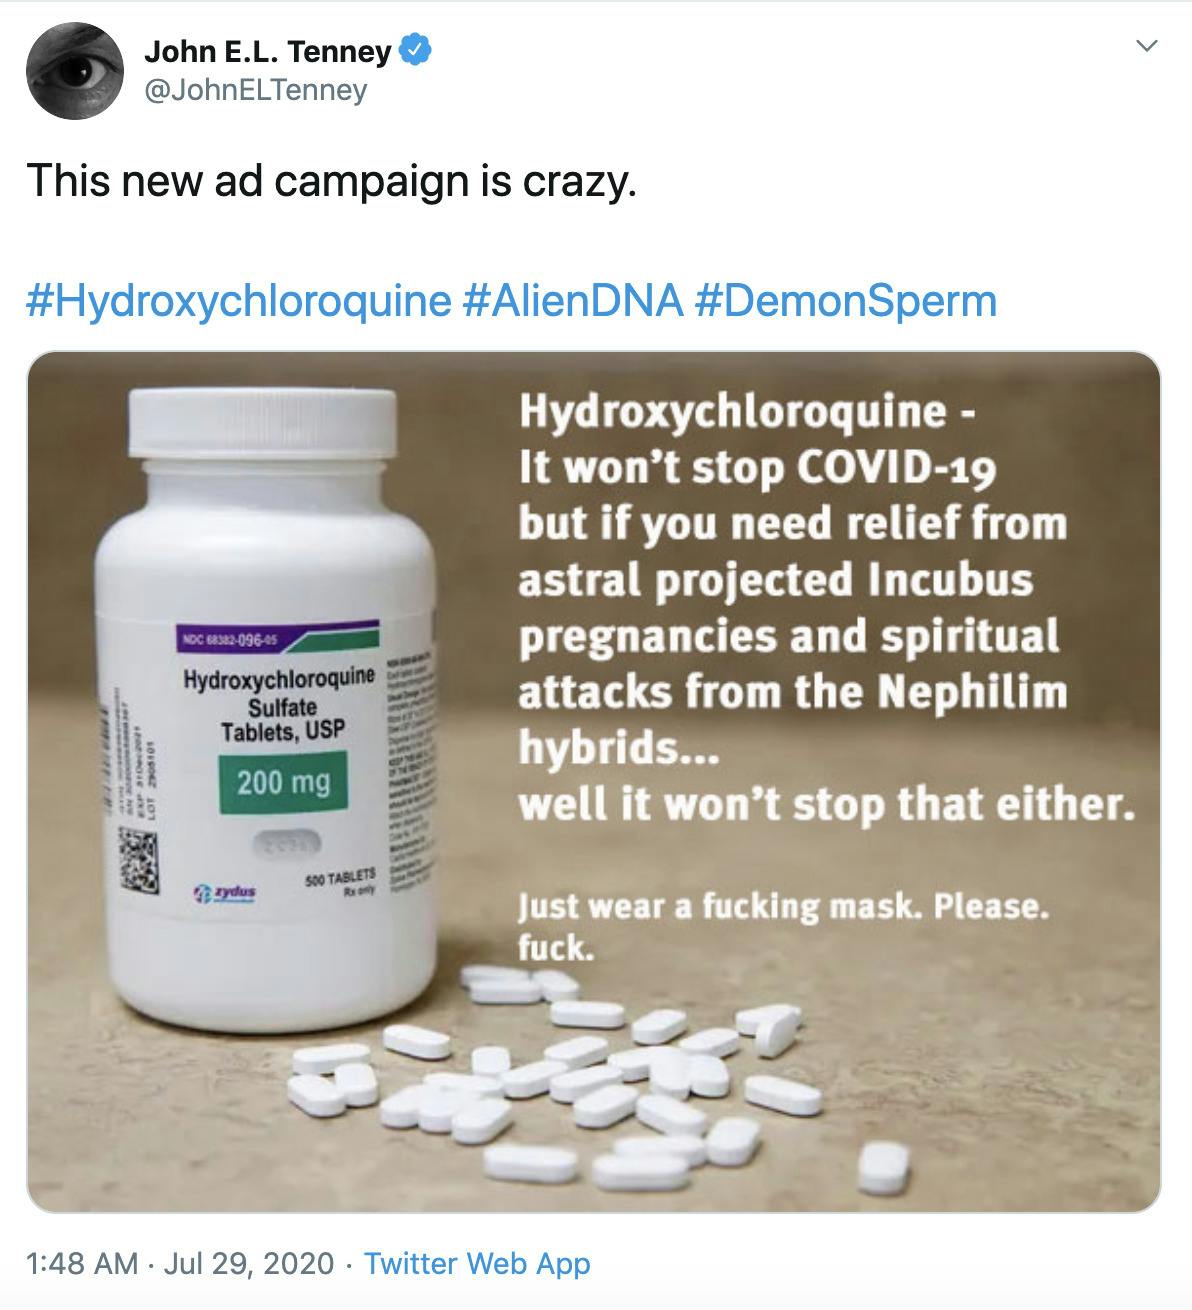 "This new ad campaign is crazy.  #Hydroxychloroquine #AlienDNA #DemonSperm" image of a pill bottle with the text "Hydroxychloroquine - It won't stop Covid-19 but if you need relief from astral projected Incubus pregnancies and spiritual attack from the Nephilim hybrids... well it won't stop that either. Just wear a mask. Please"